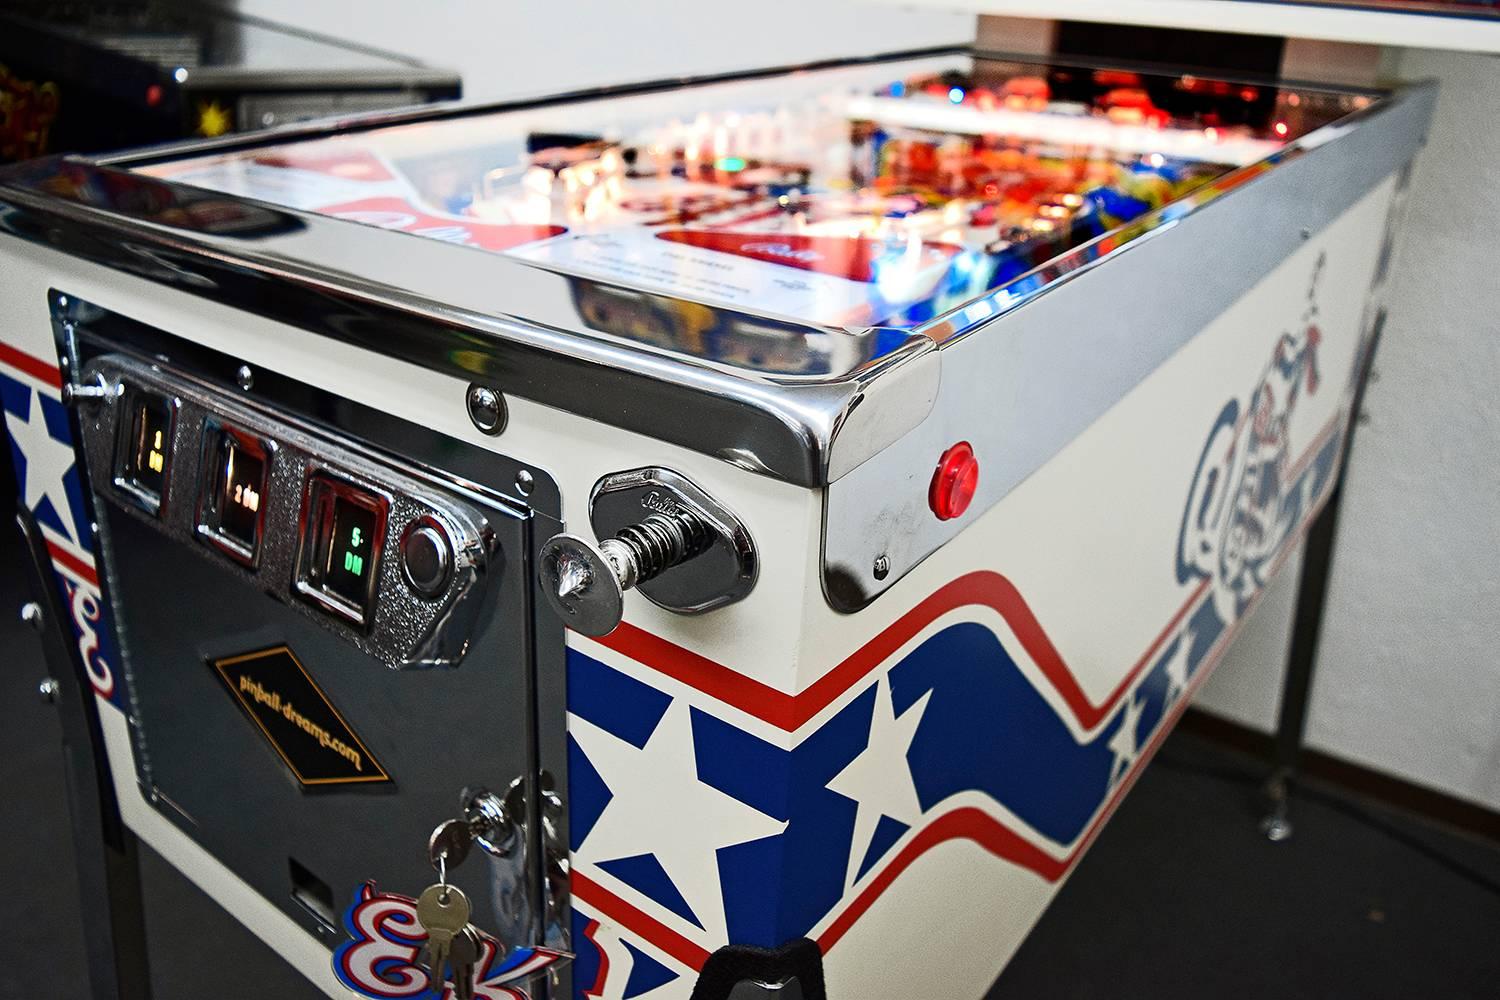 Evel Knievel is one of Bally's smash hits of the late 1970s featuring the famous motorcycle stunt driver. Due to a popular and appealing theme as well as an engaging game play people were queuing up to play the game when it came out. The playfield